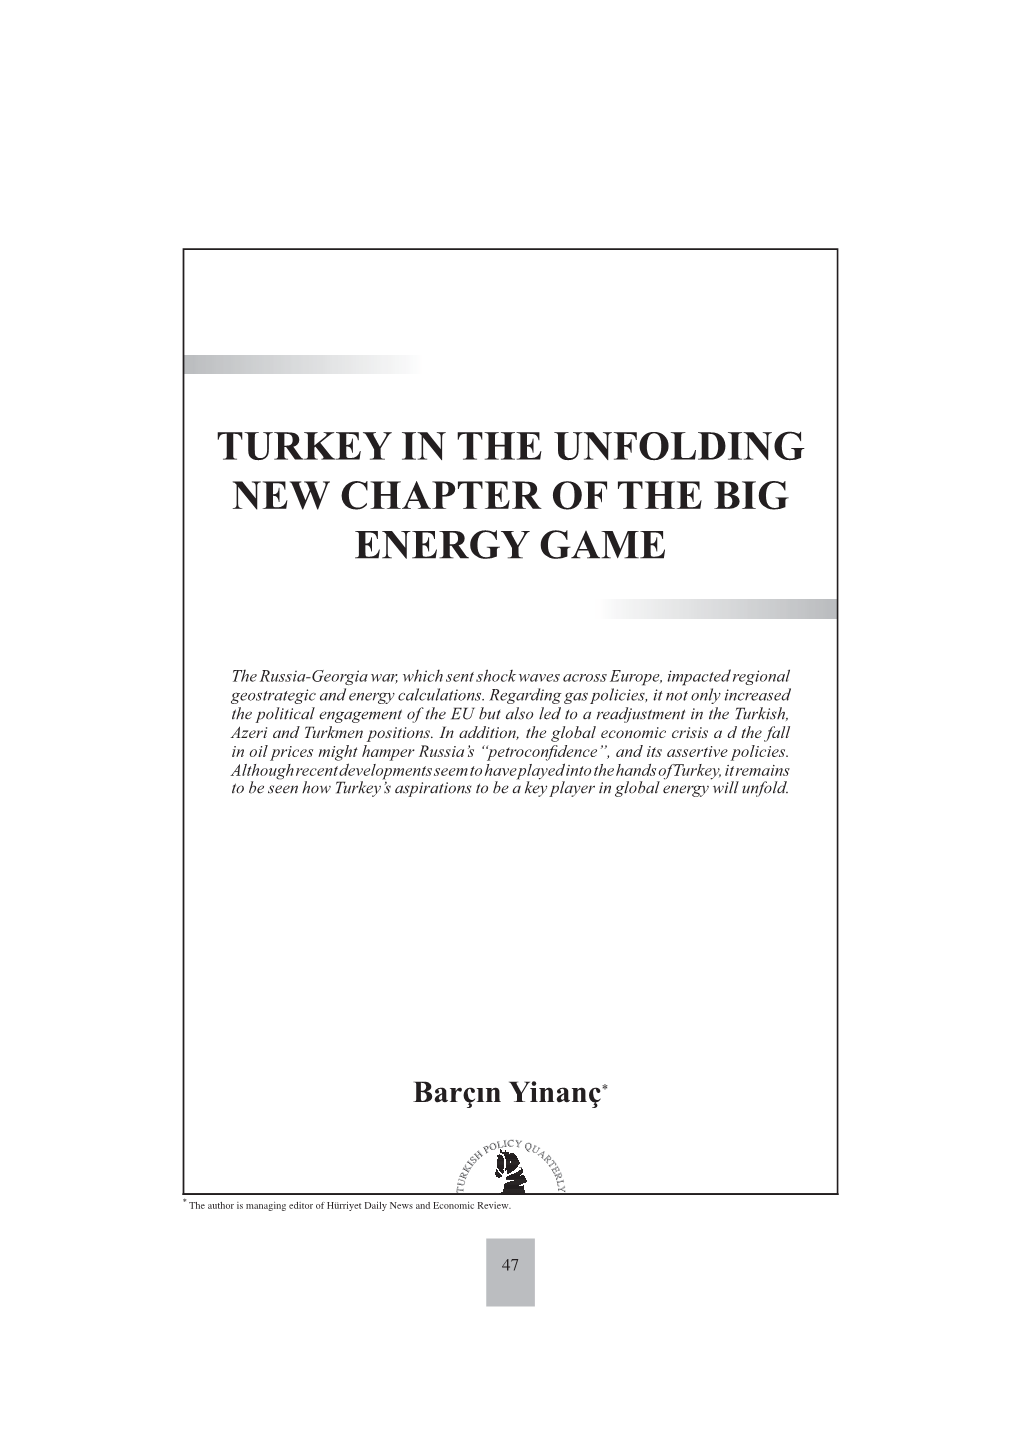 Turkey in the Unfolding New Chapter of the Big Energy Game